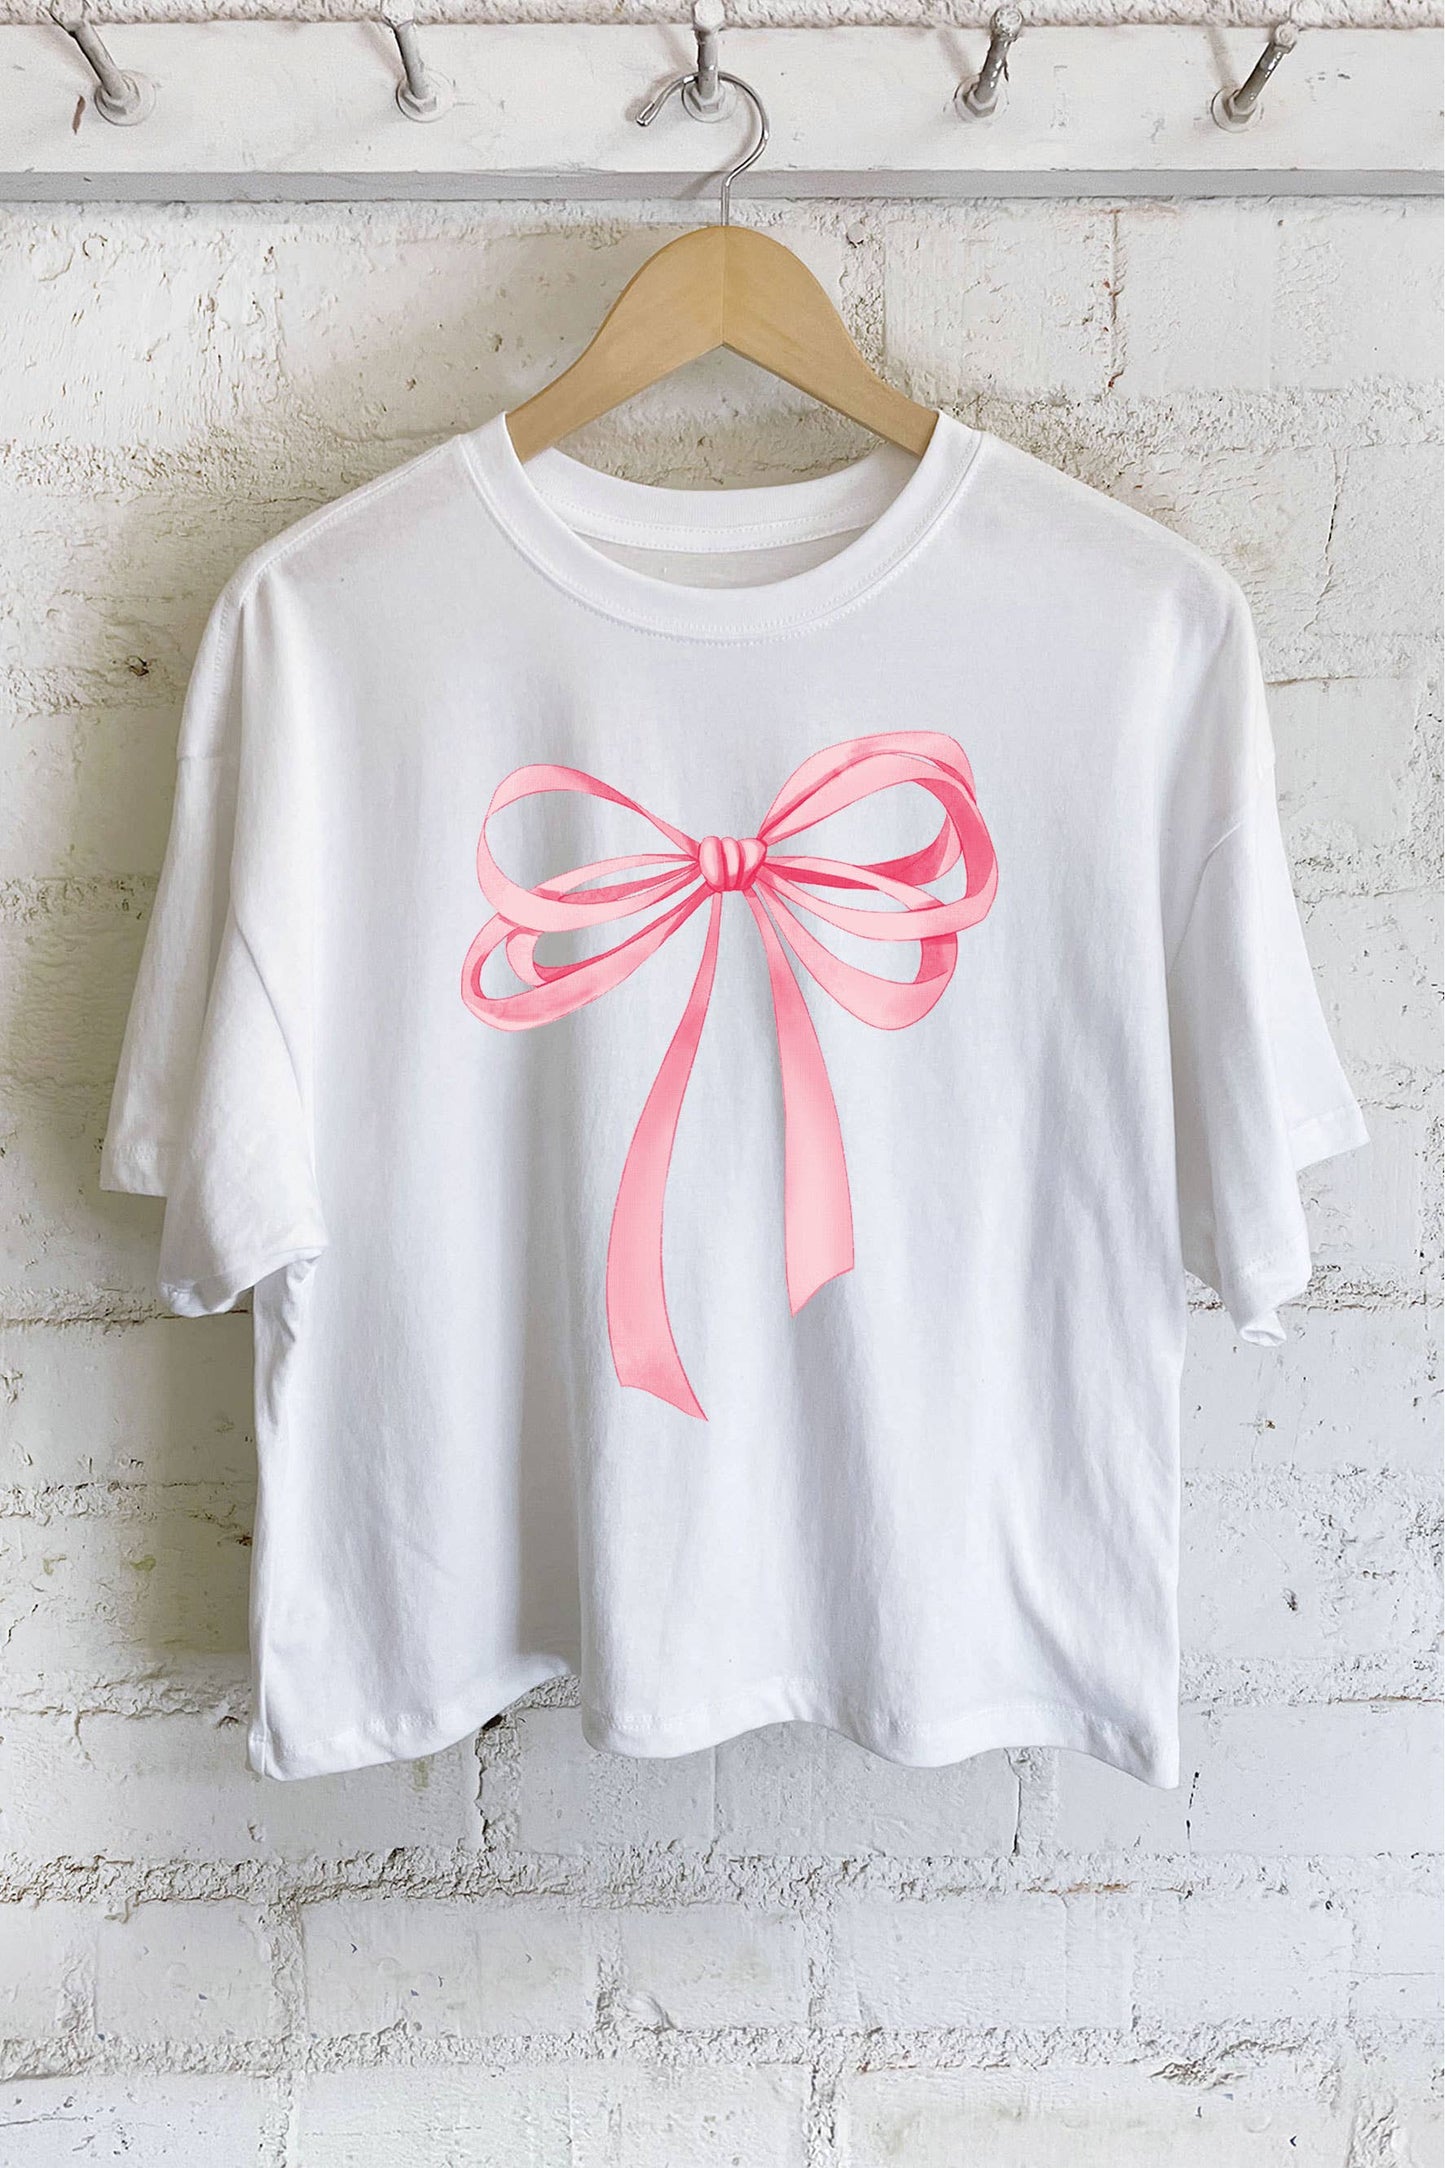 Introducing the COQUETTE Pink Bow Crop Top. Made with soft cotton fabric, this relaxed and boxy fit tee features a classic crew neckline and a unique pink bow graphic. Its slightly cropped fit adds a modern twist to this timeless piece. Perfect for adding a touch of femininity to any outfit.